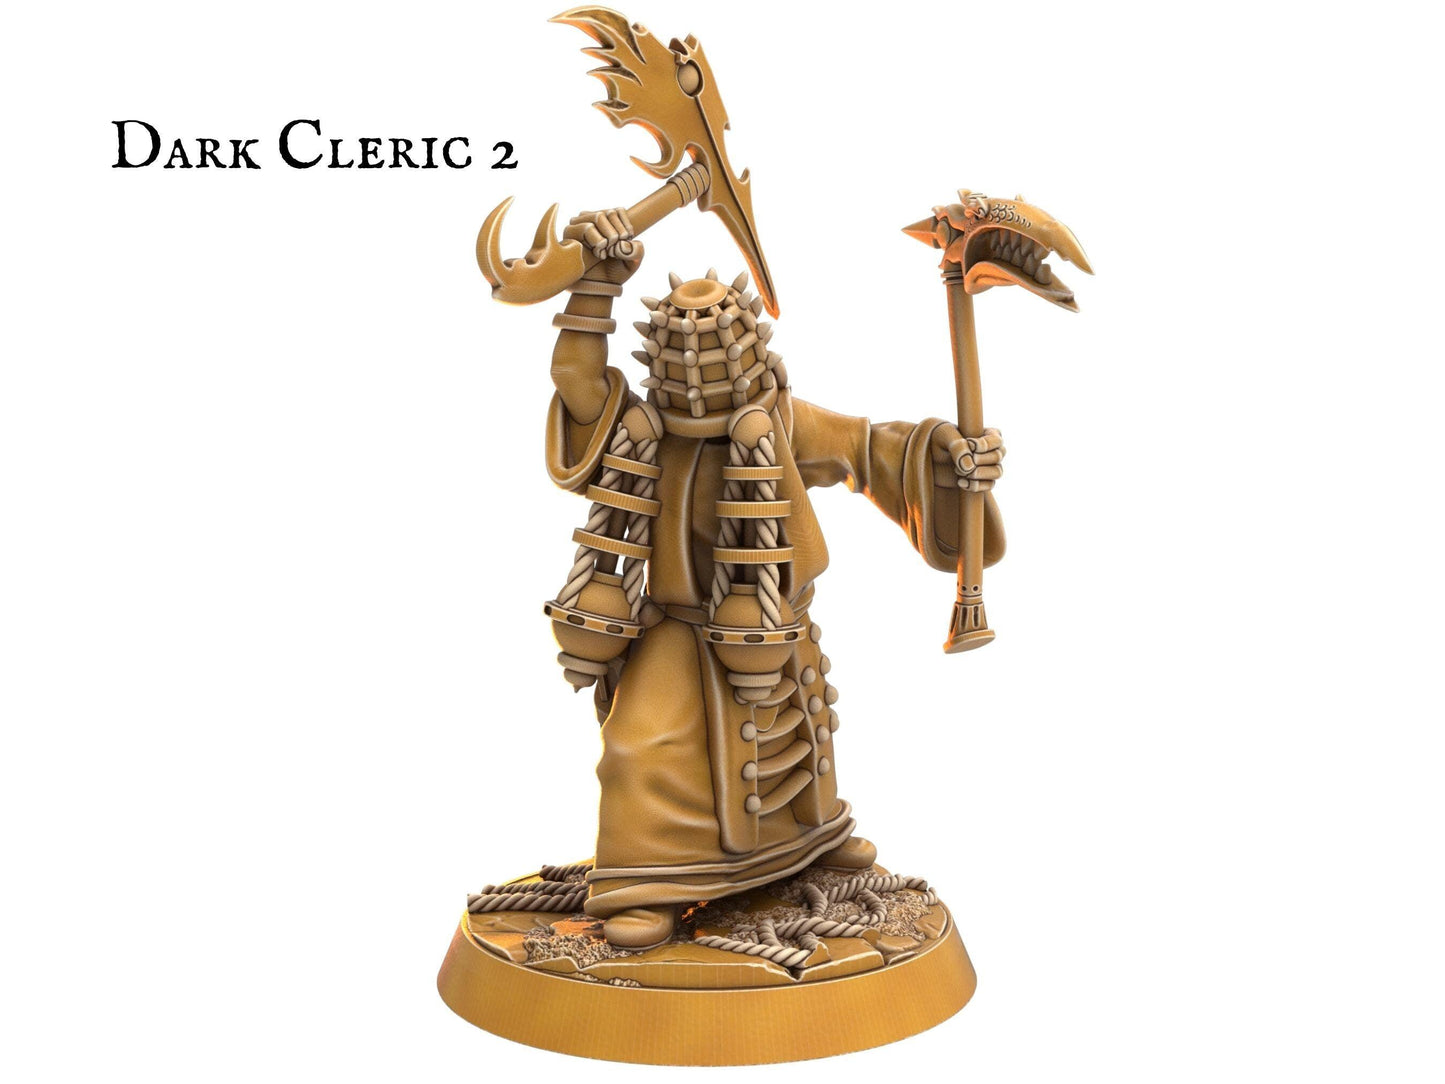 Male Dark Cleric Miniature Warlock Miniature - 5 Poses - 32mm scale Tabletop gaming DnD Miniature Dungeons and Dragons, dnd 5e - Plague Miniatures shop for DnD Miniatures